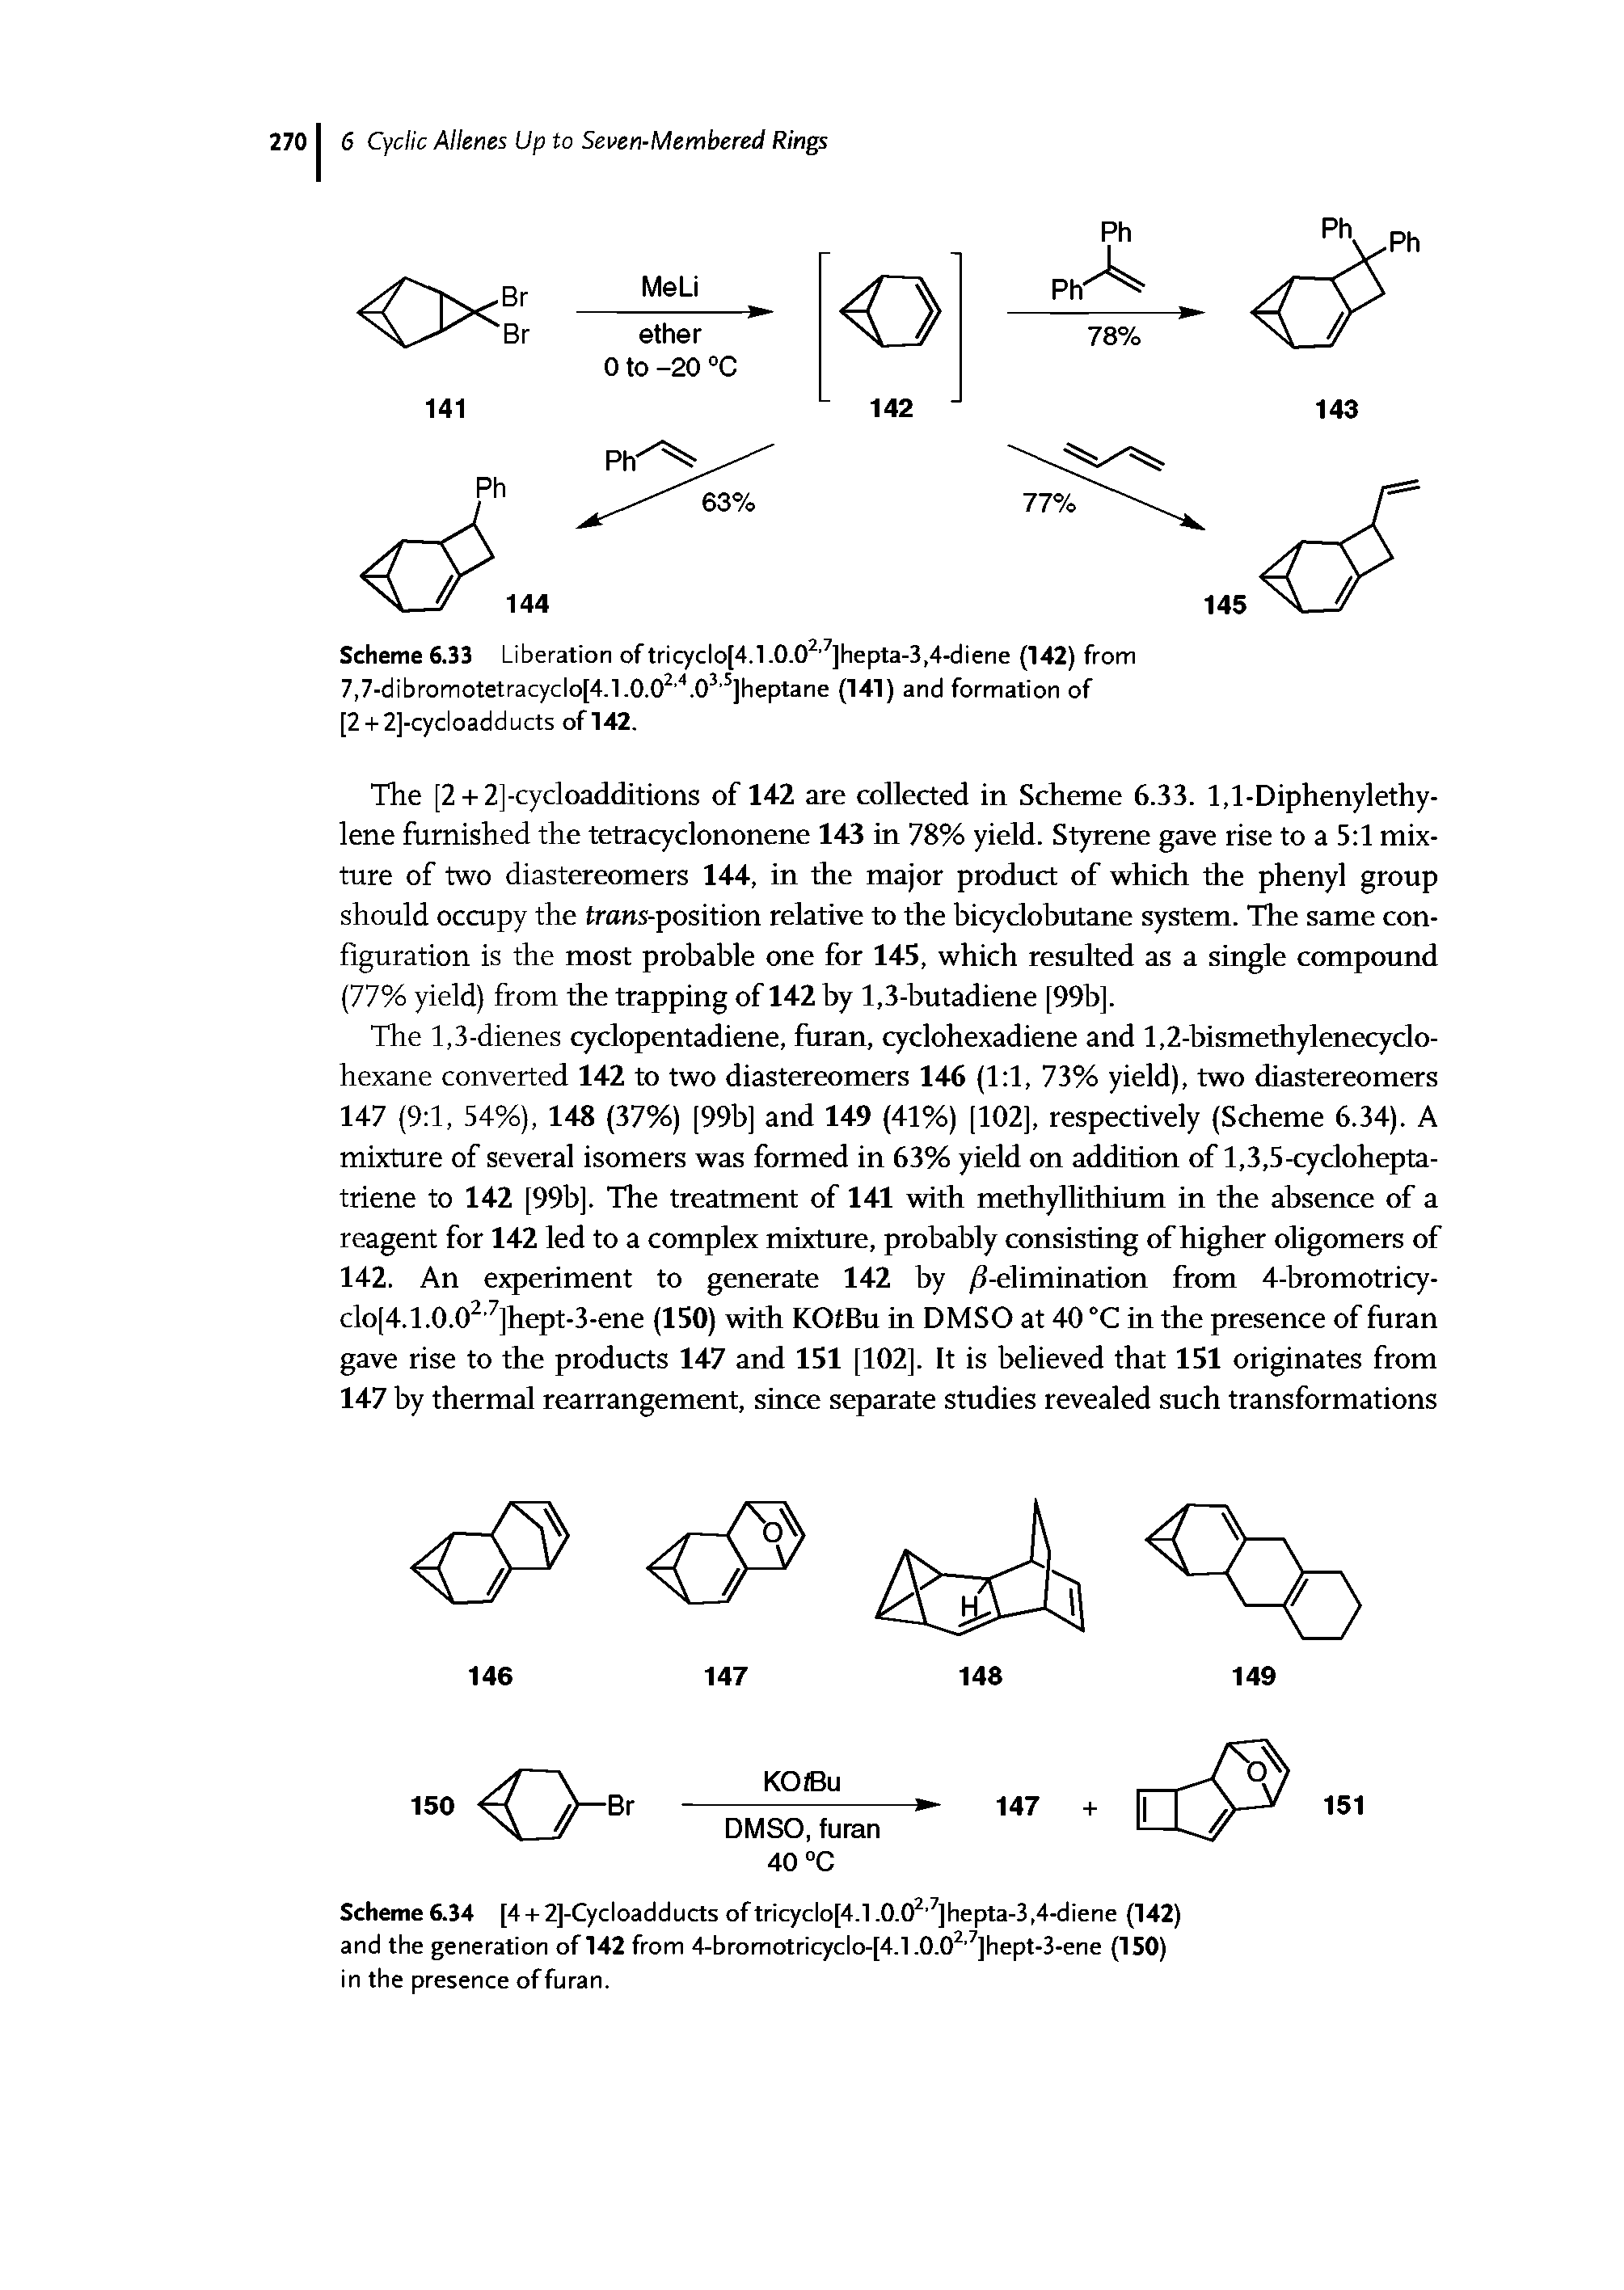 Scheme 6.33 Liberation of tricyclo[4.1.0.02,7]hepta-3,4-diene (142) from 7,7-dibromotetracyclo[4.1.0.02,4.03,5]heptane (141) and formation of [2 + 2]-cycloadducts of 142.